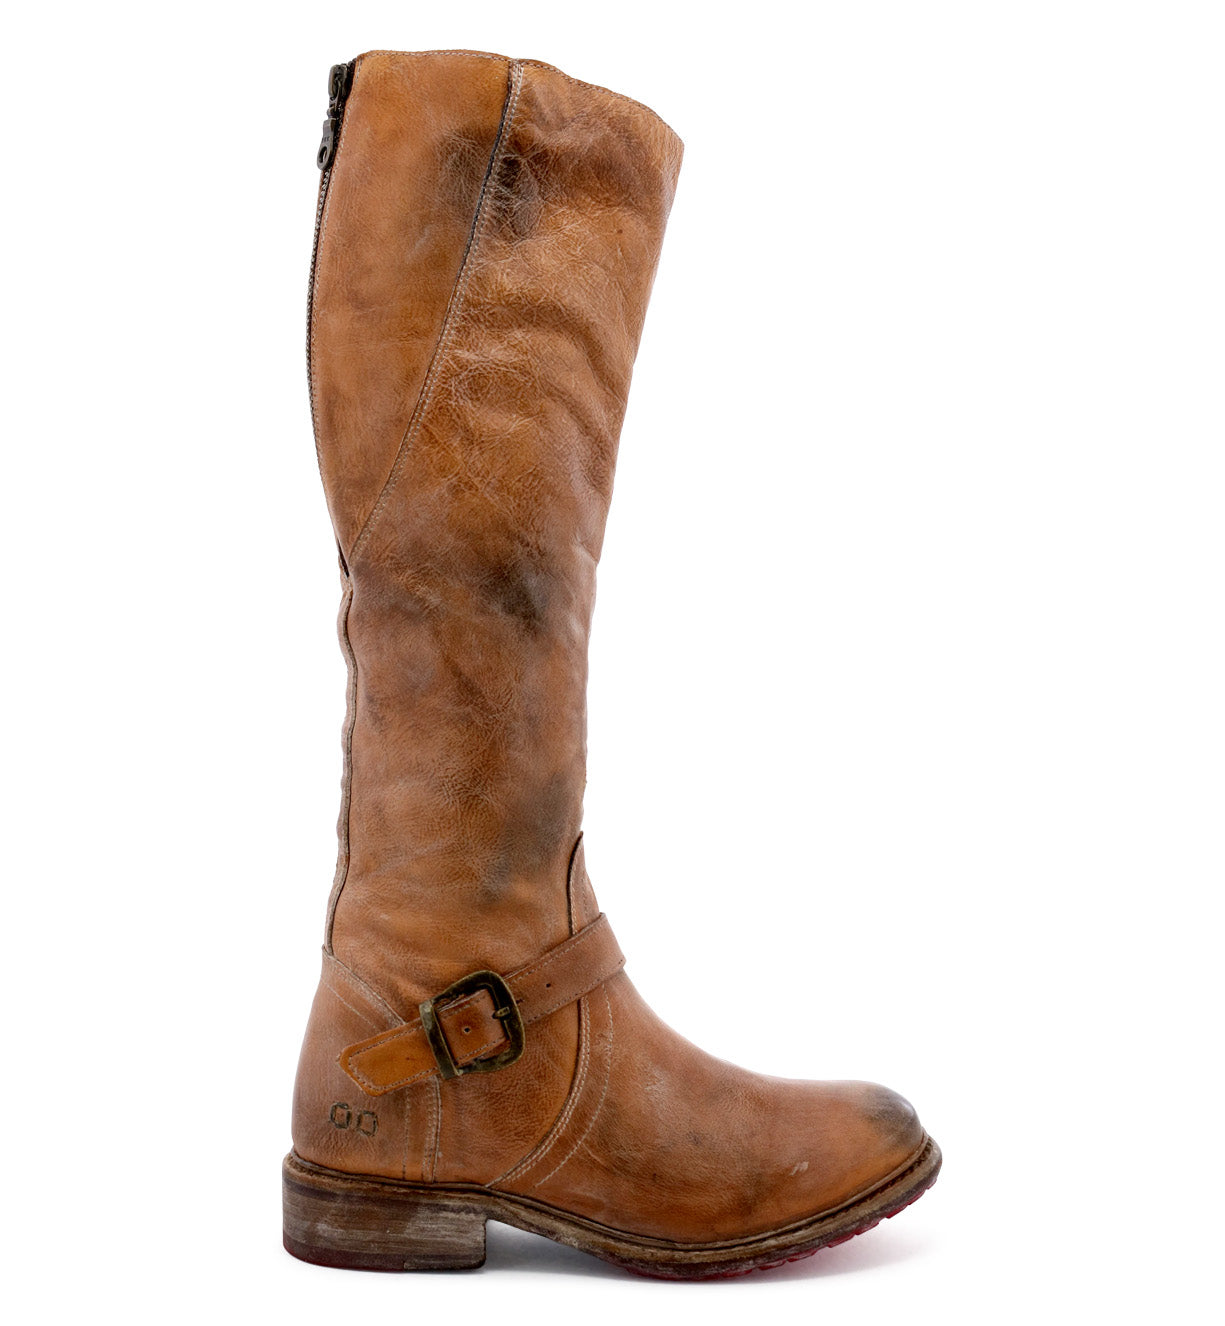 A Glaye women's tan leather riding boot with buckles by Bed Stu.